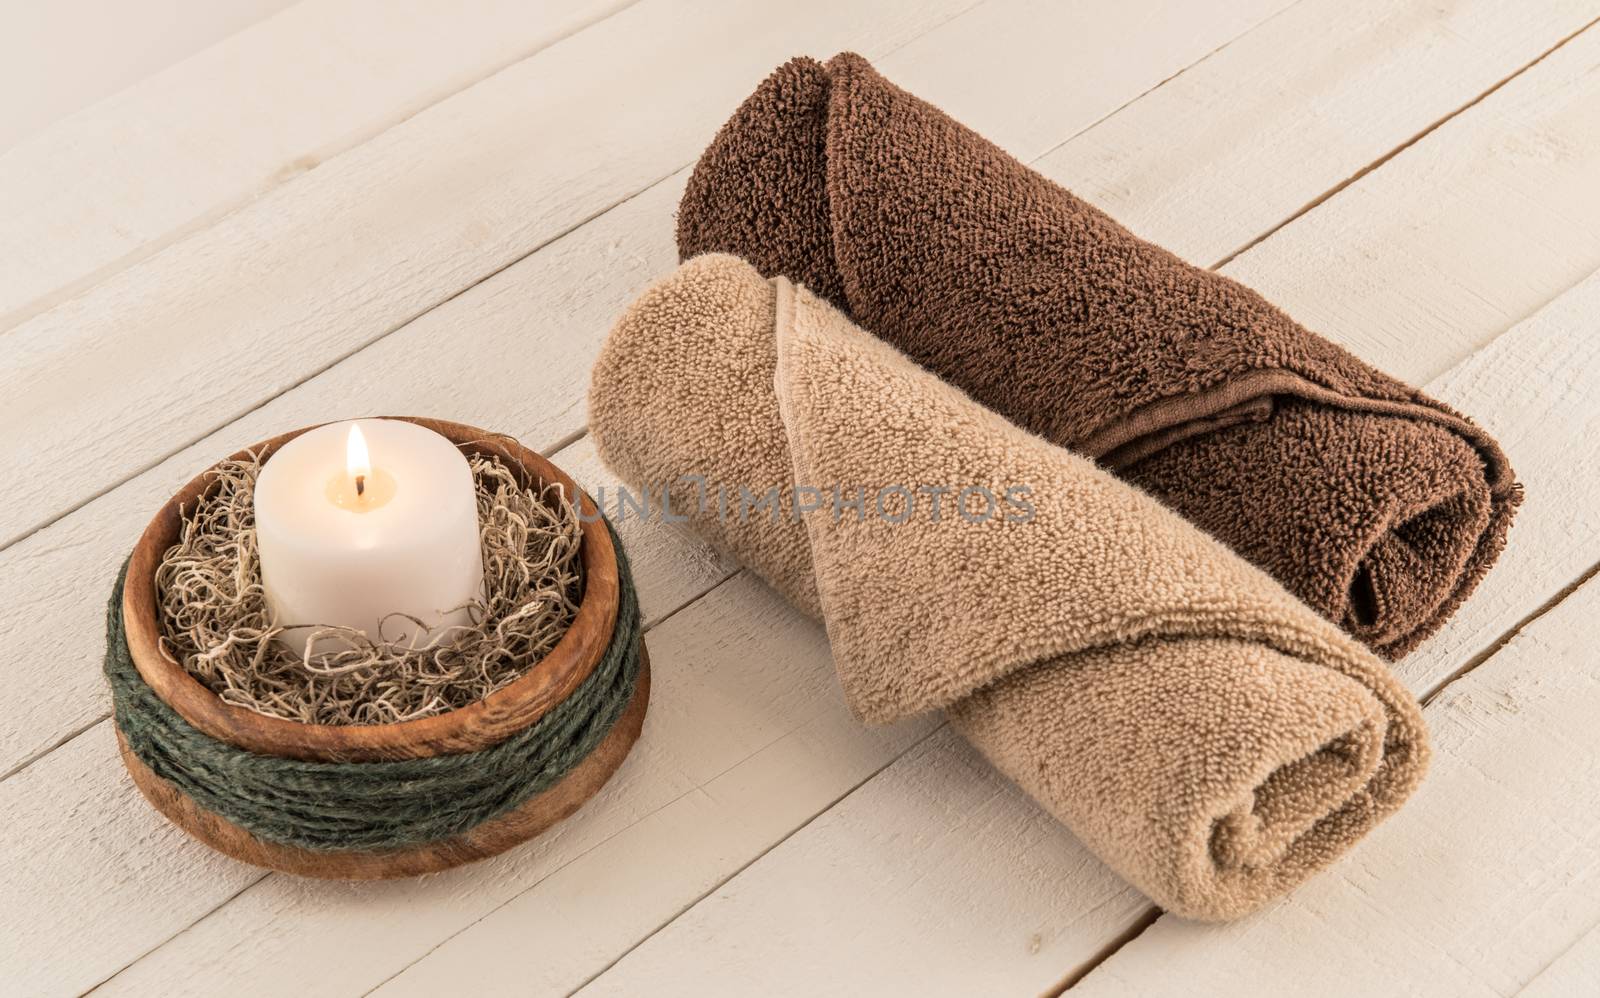 Beige and brown spa towels with aromatherapy candle, on rustic white plank background